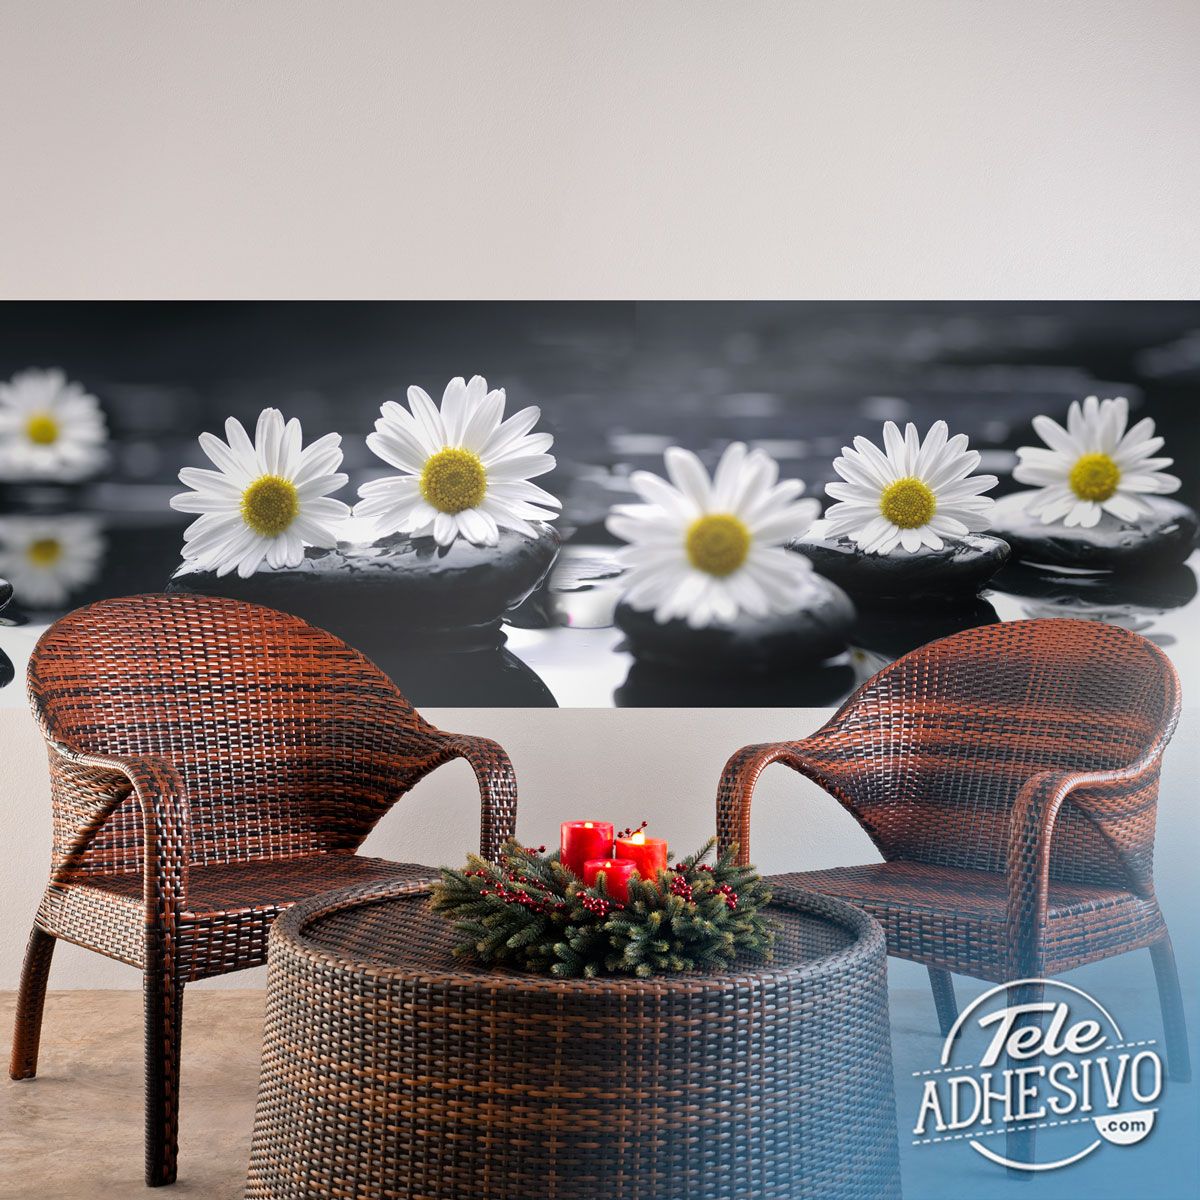 Wall Murals: Daisies on black stones